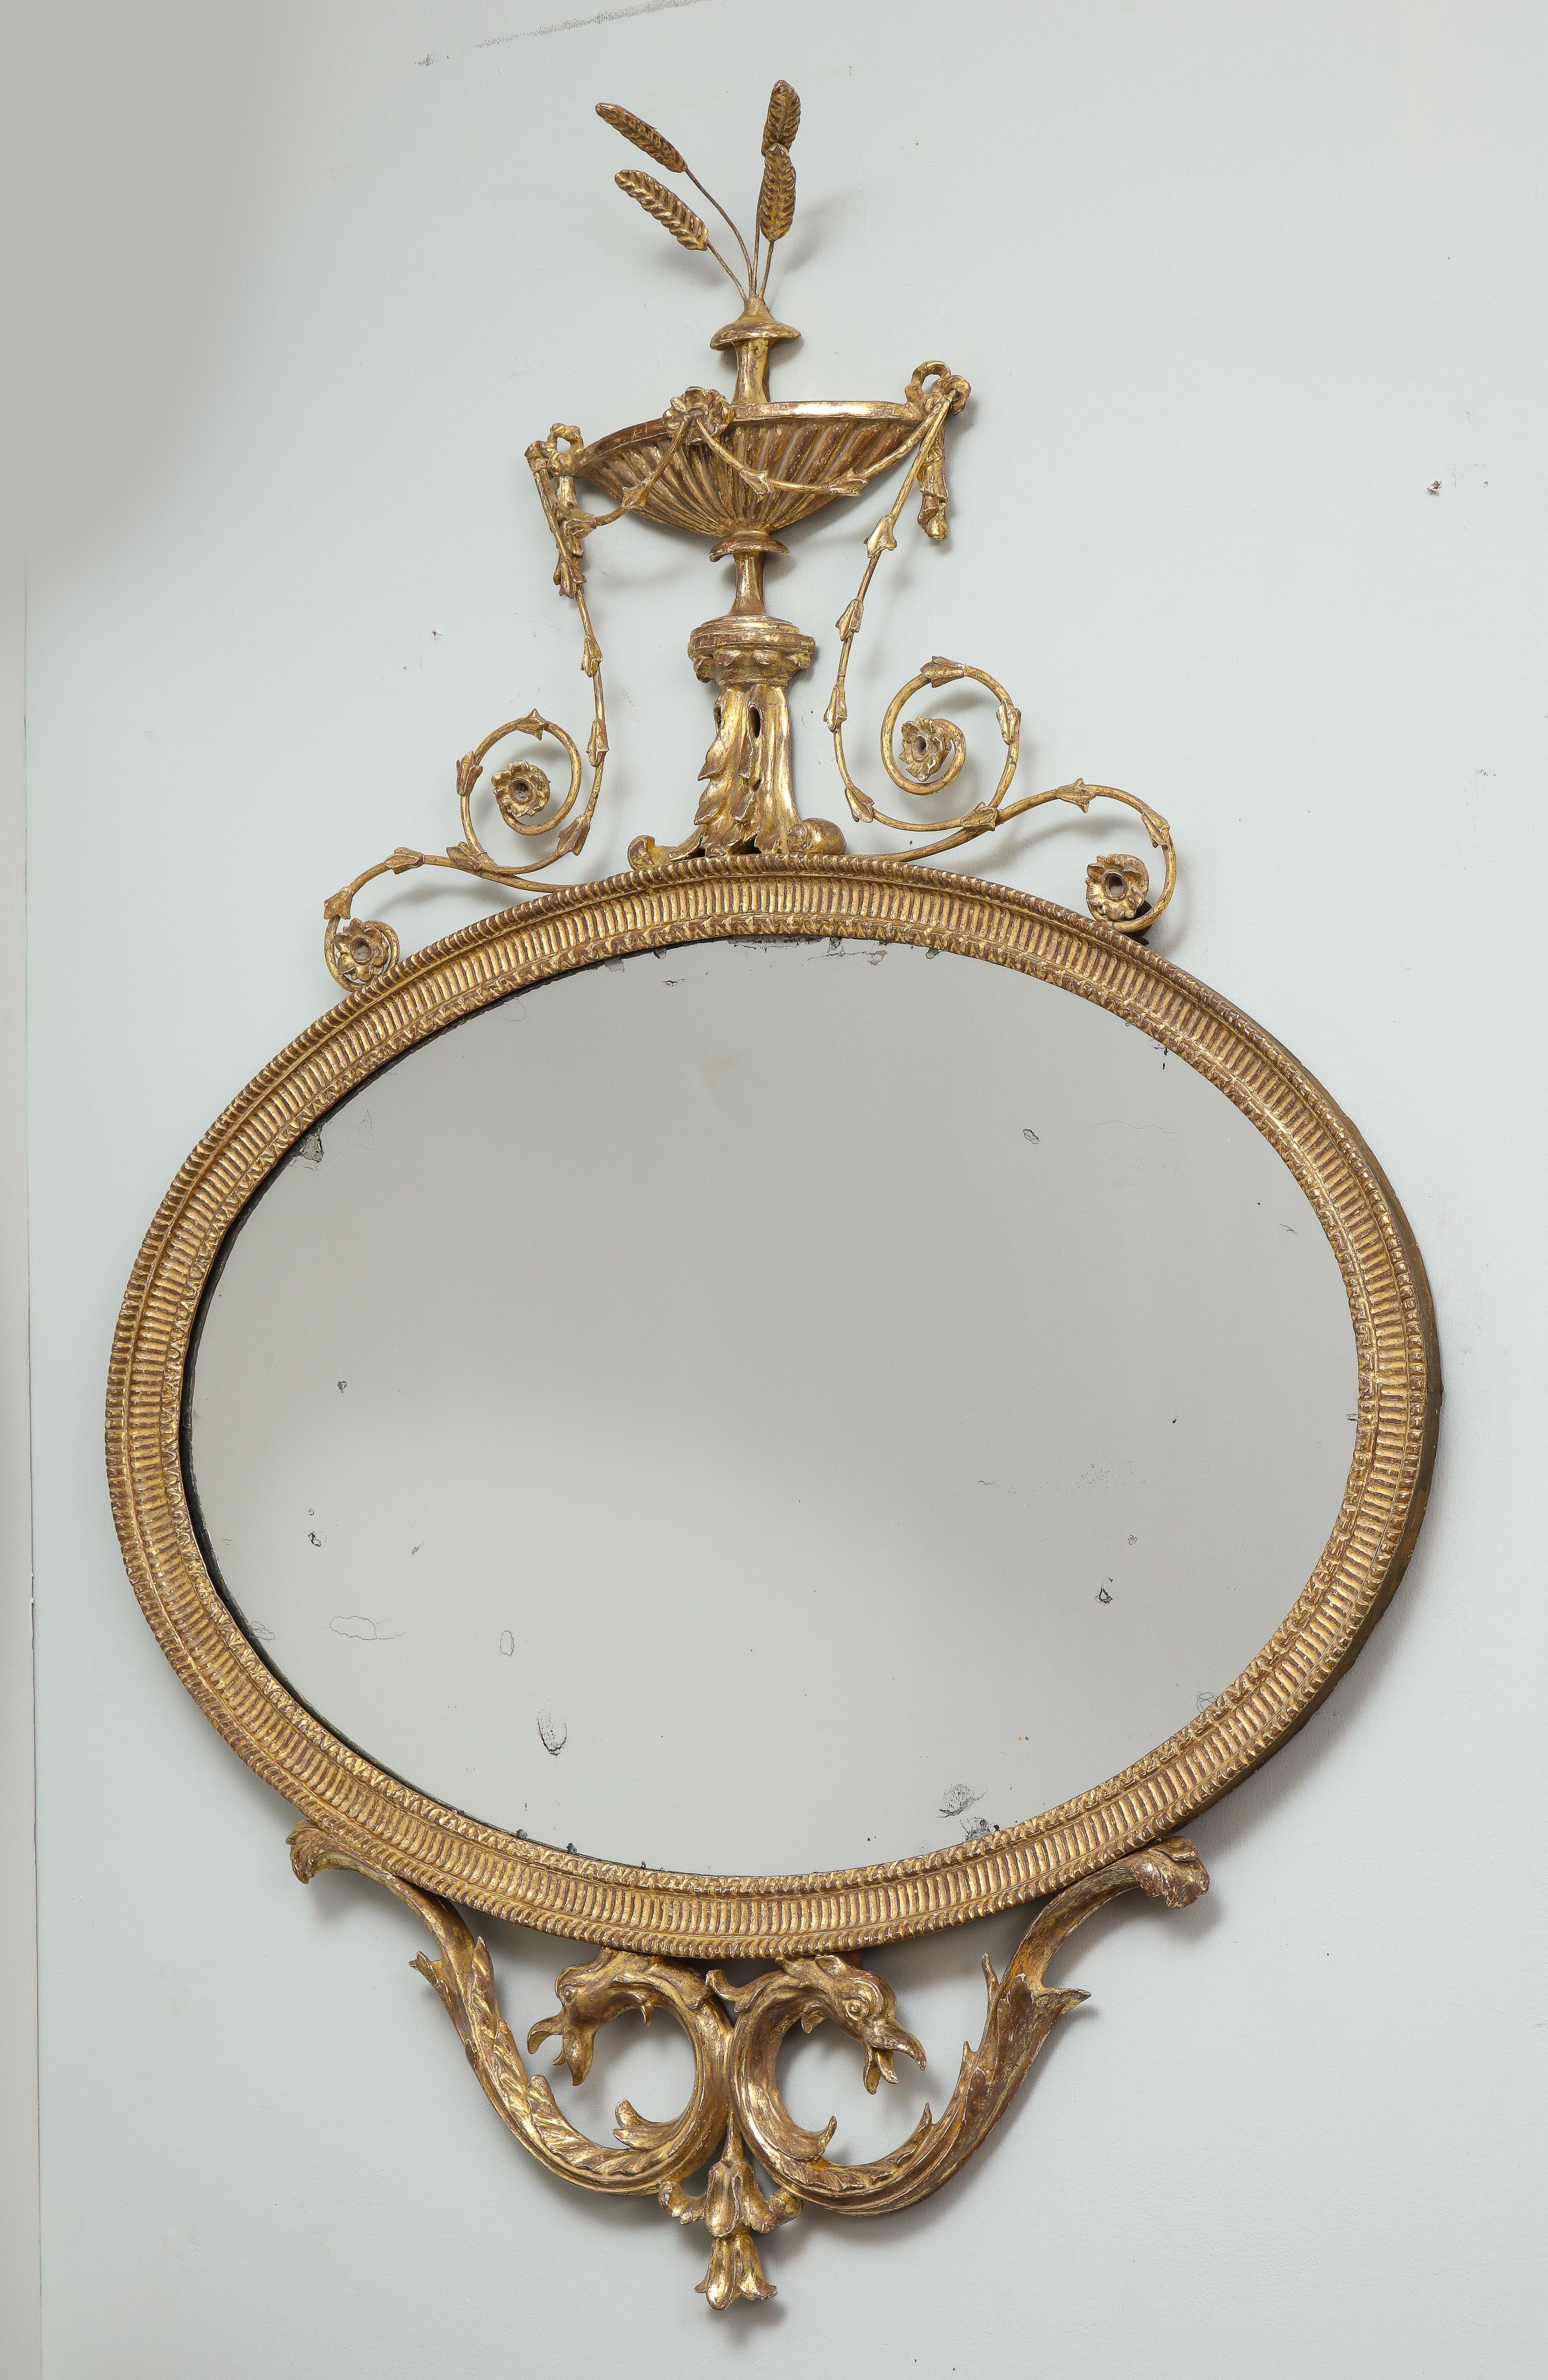 Fine George III period giltwood mirror, the classical urn finial with sprouting wheat ears, the urn draped with garlands of bell flowers surmounting the ribbed and lamb tongue carved oval frame having original speckled mercury glass plate, the base